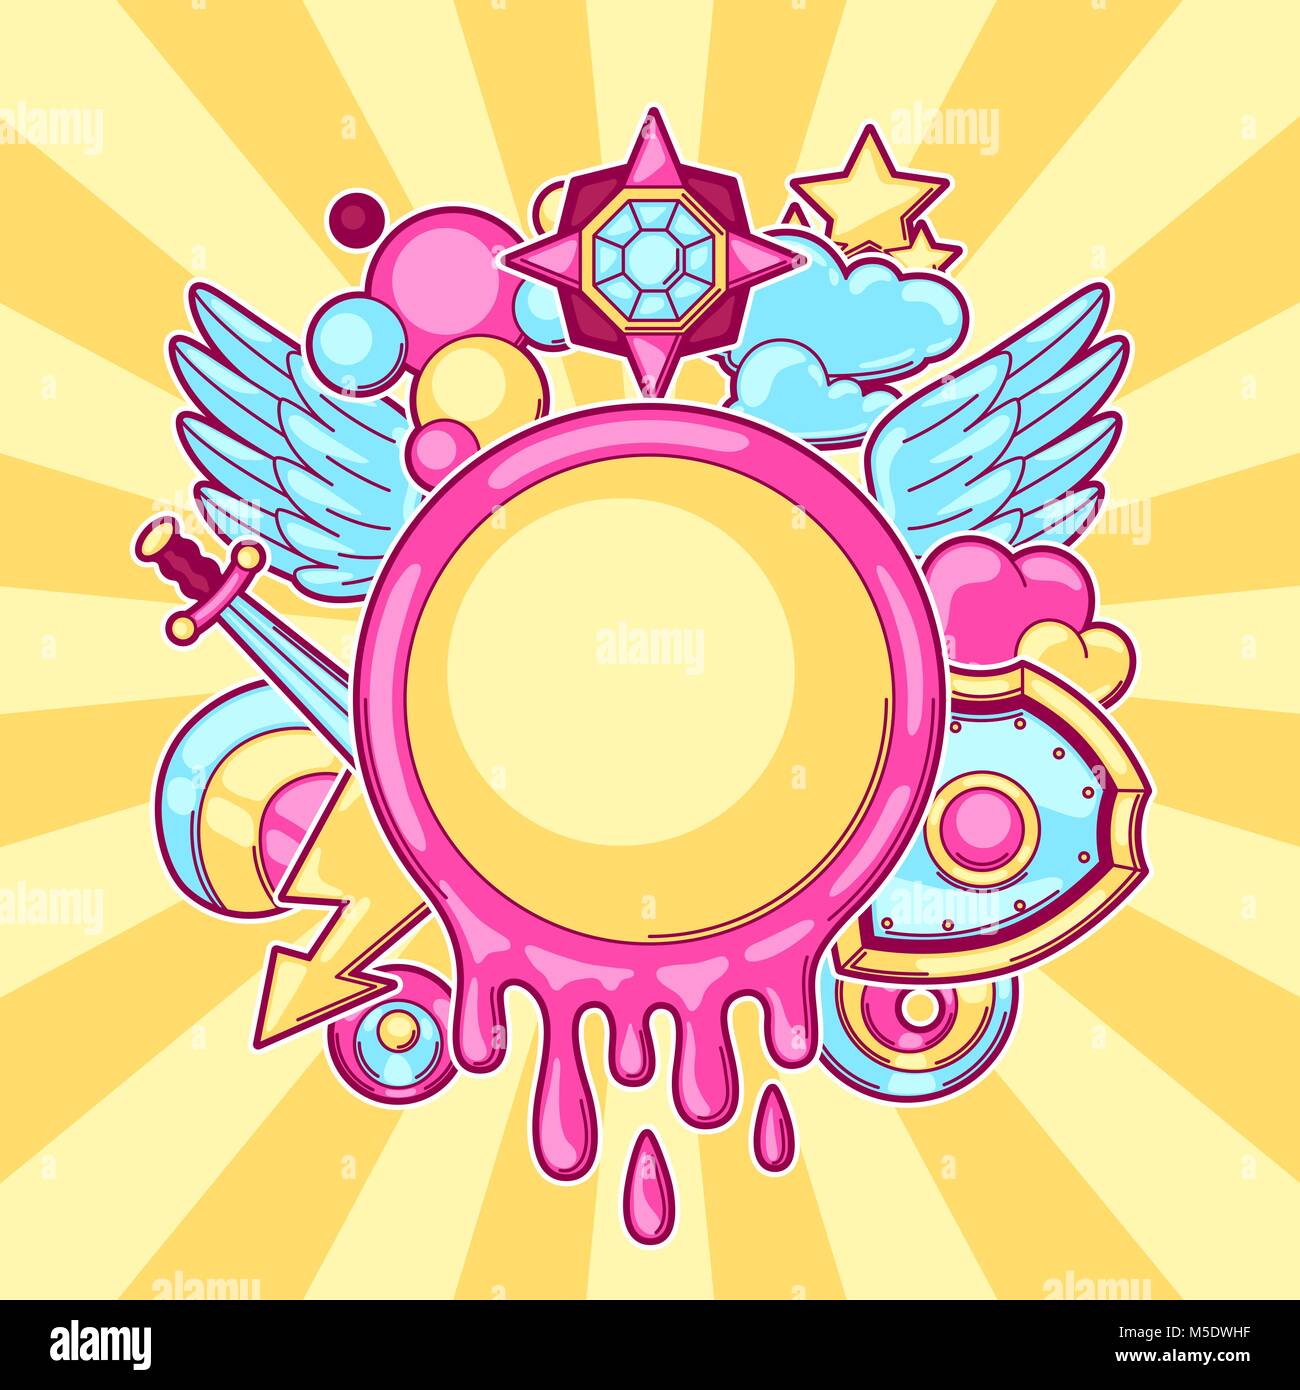 Background with cartoon fantasy objects. Fashion symbols in comic style Stock Vector